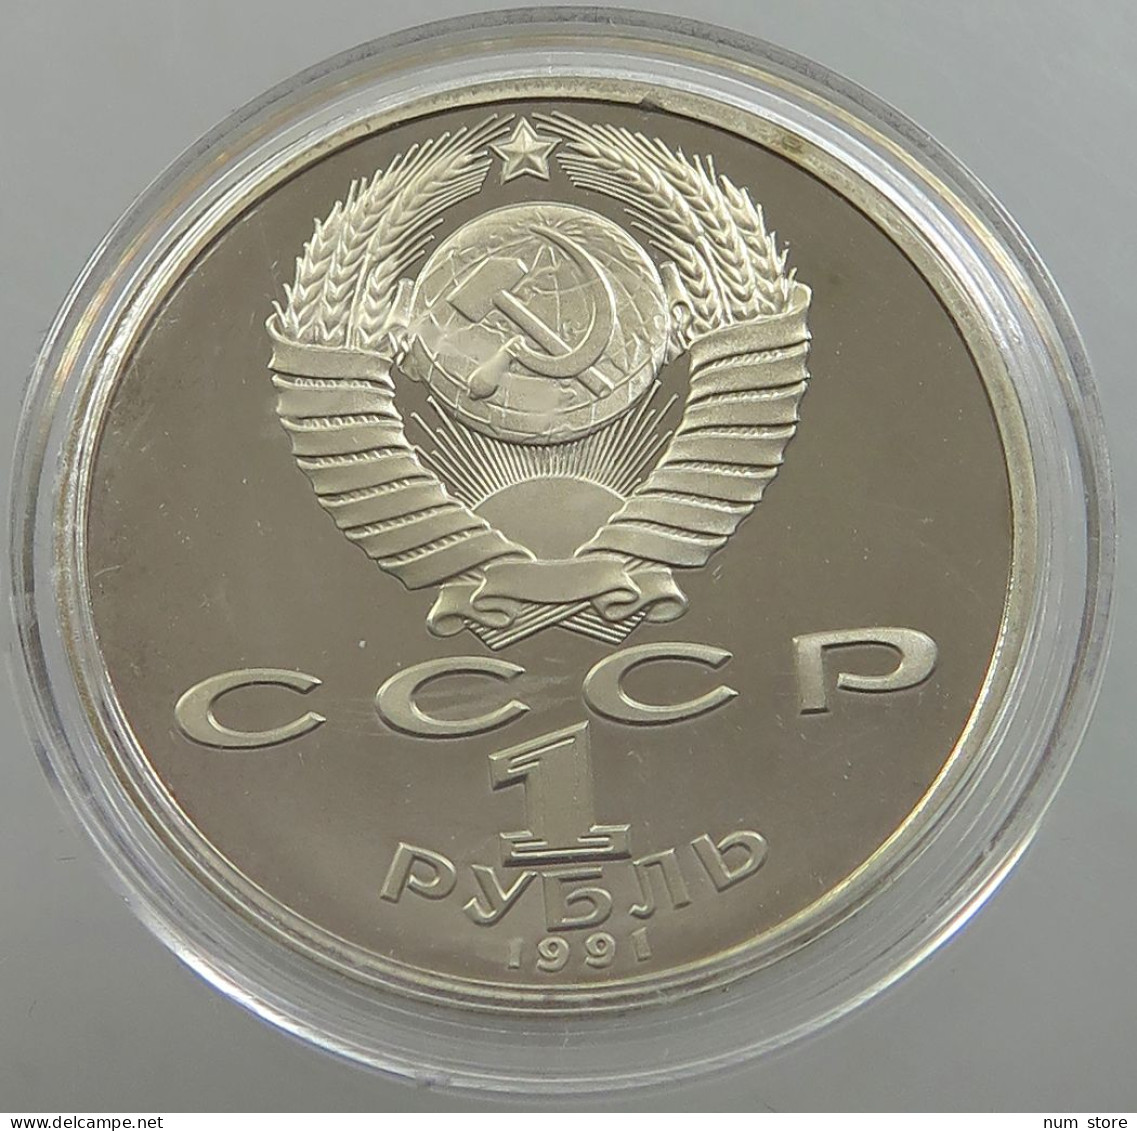 RUSSIA USSR ROUBLE 1991 NAVOI PROOF #sm14 0131 - Russland